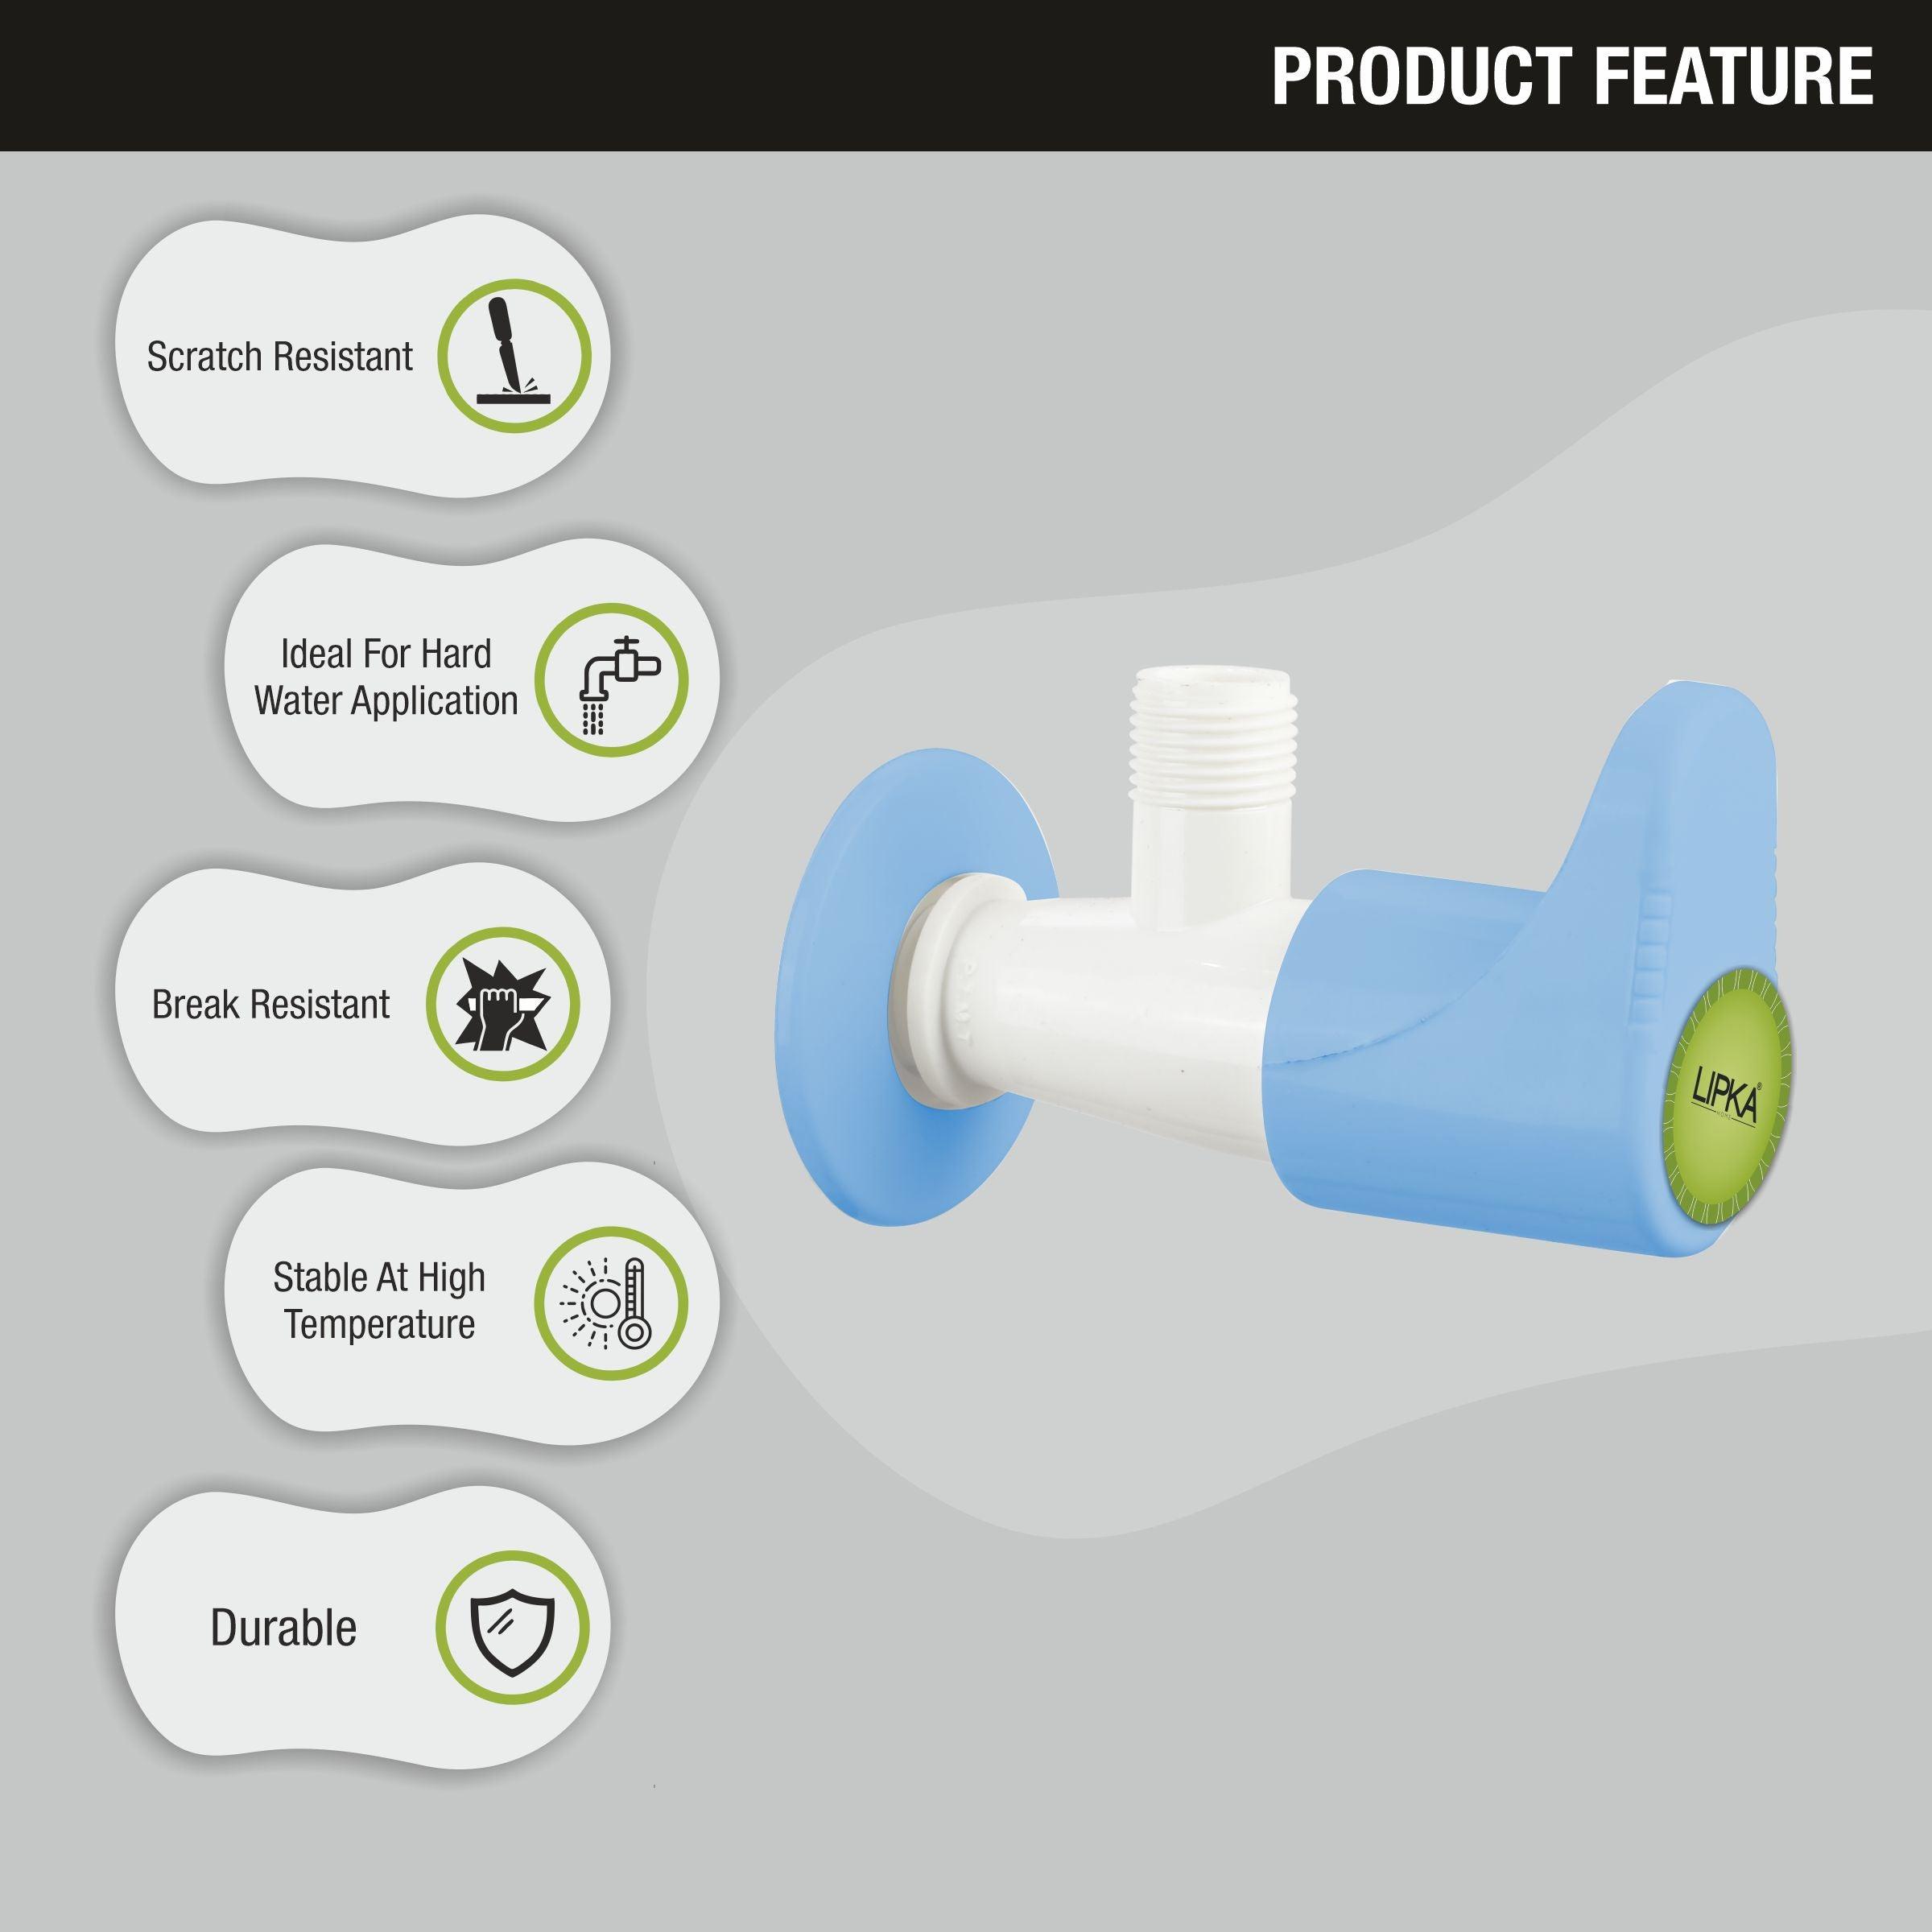 Glory Angle Valve PTMT Faucet features